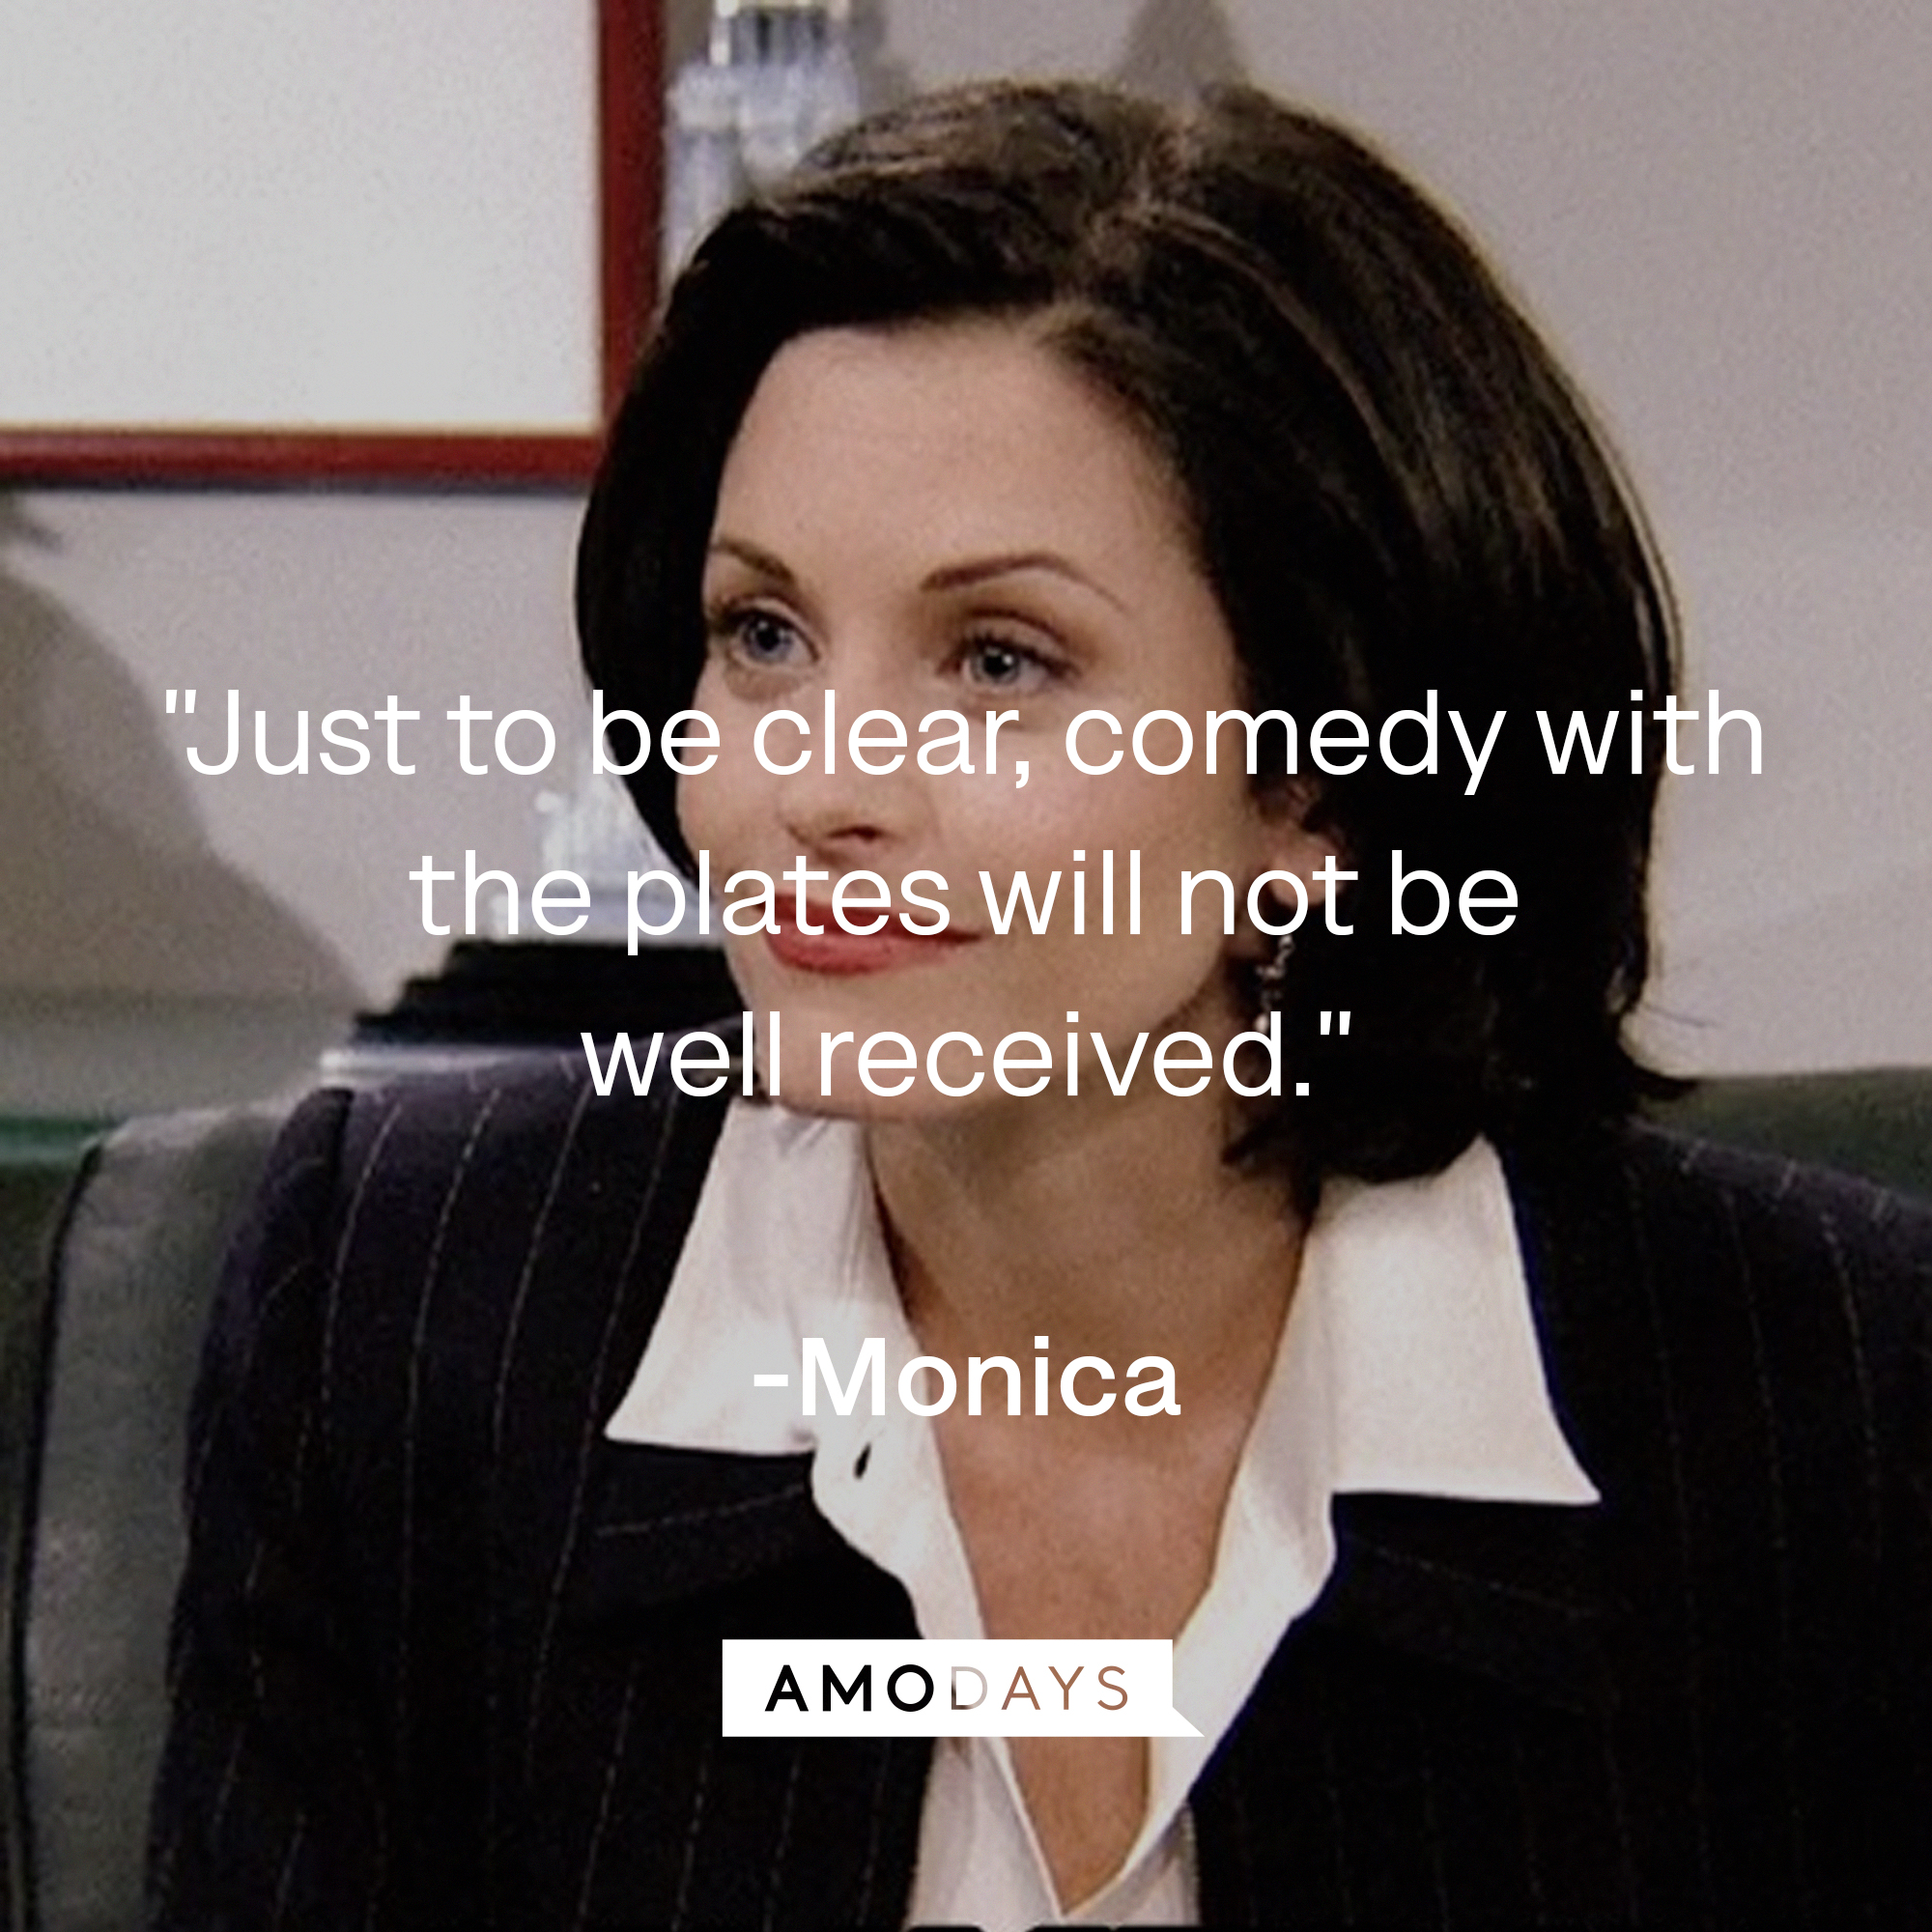 Monica’s quote: "Just to be clear, comedy with the plates will not be well received." | Source: Facebook/friends.tv